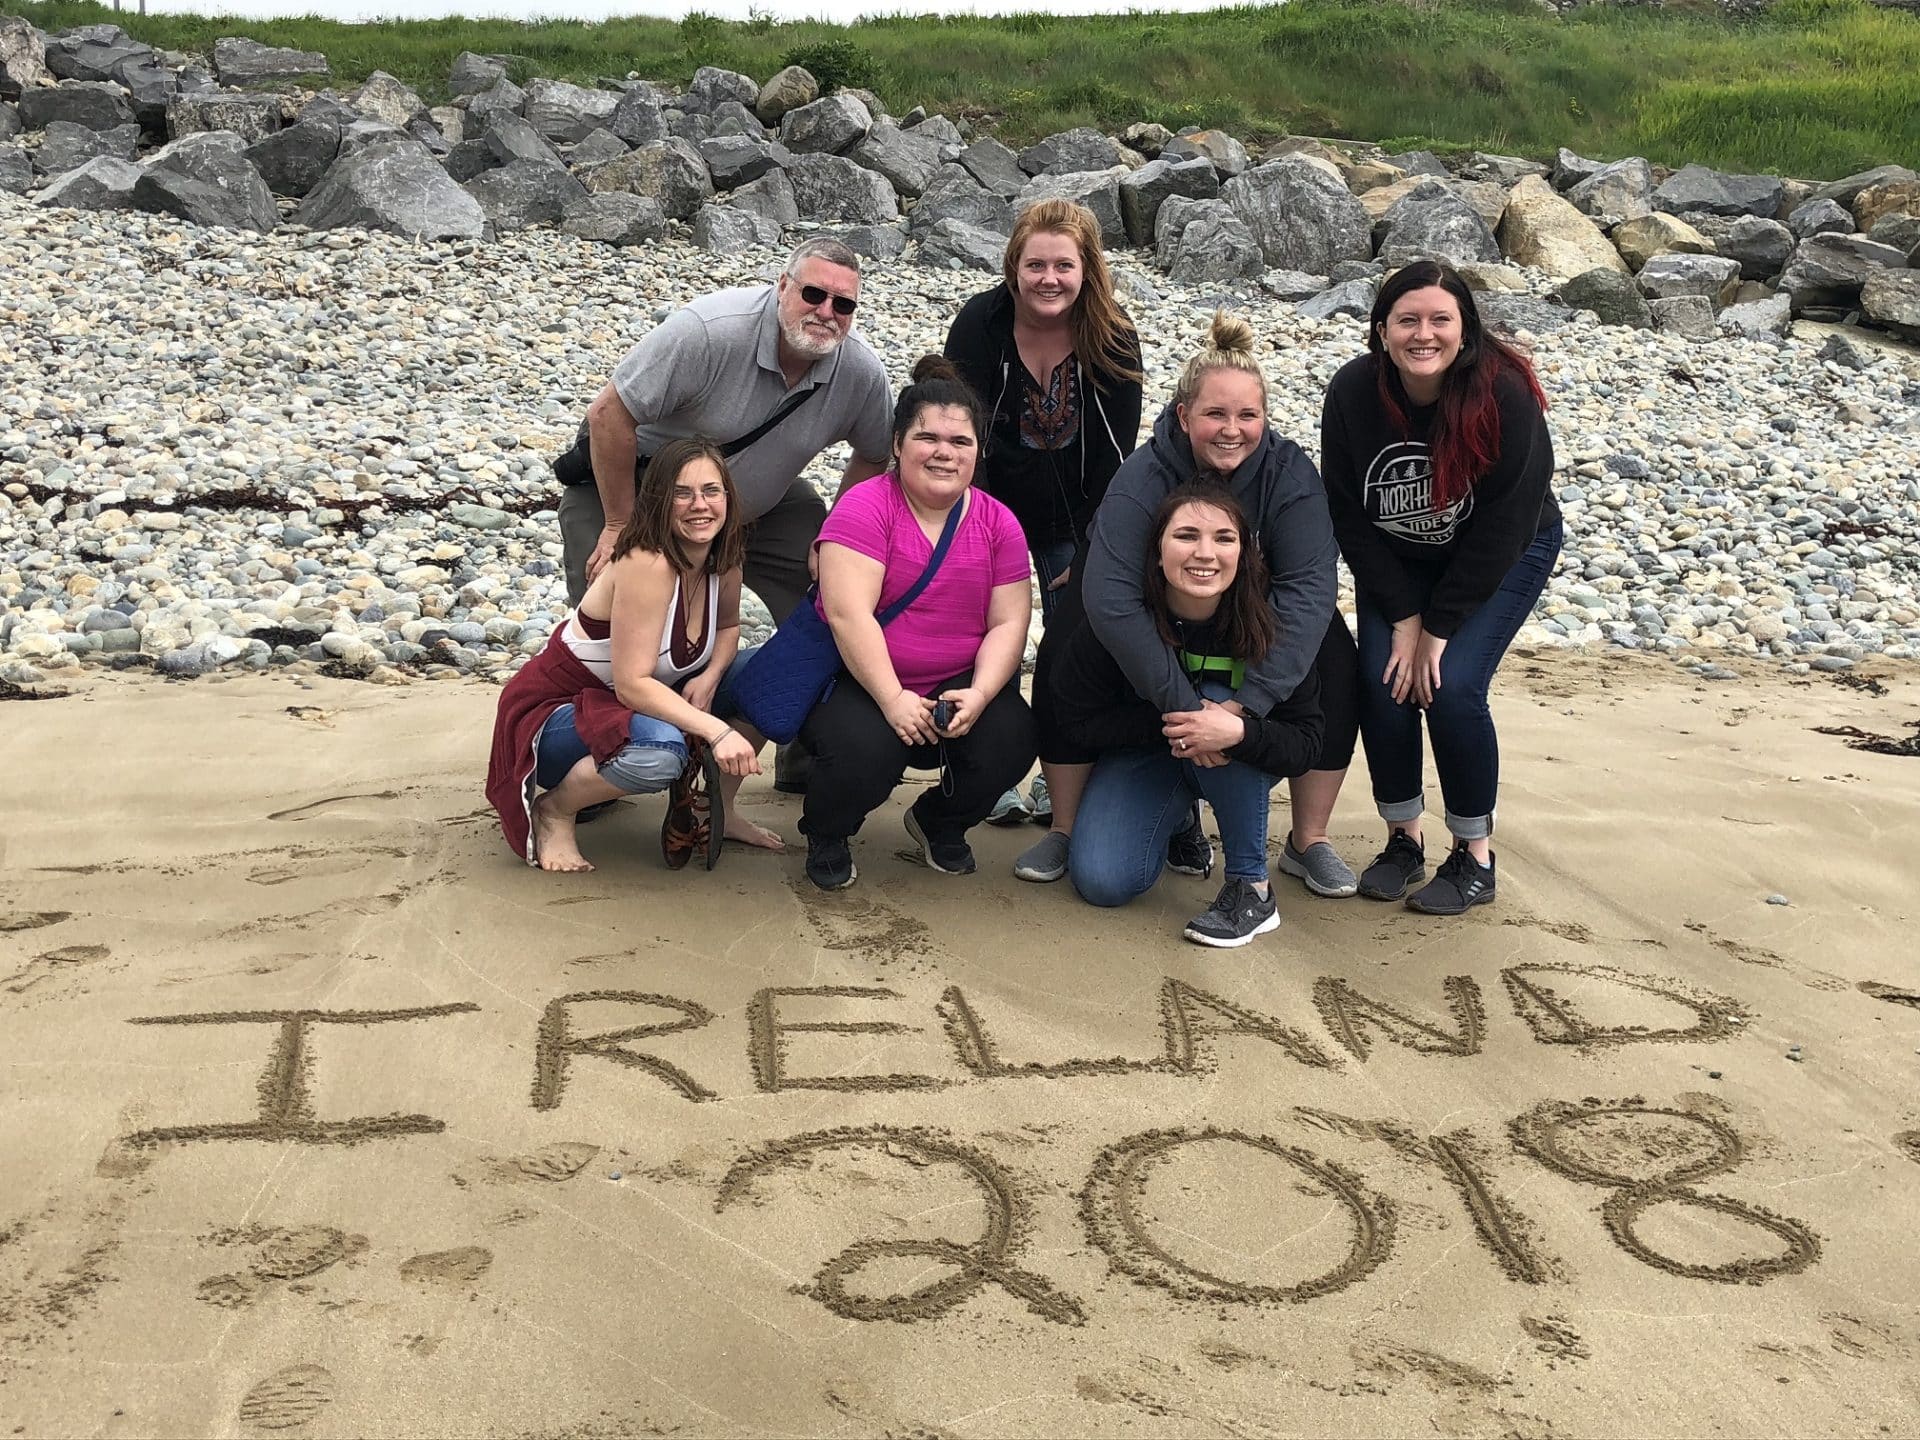 Students on the beach in Ireland